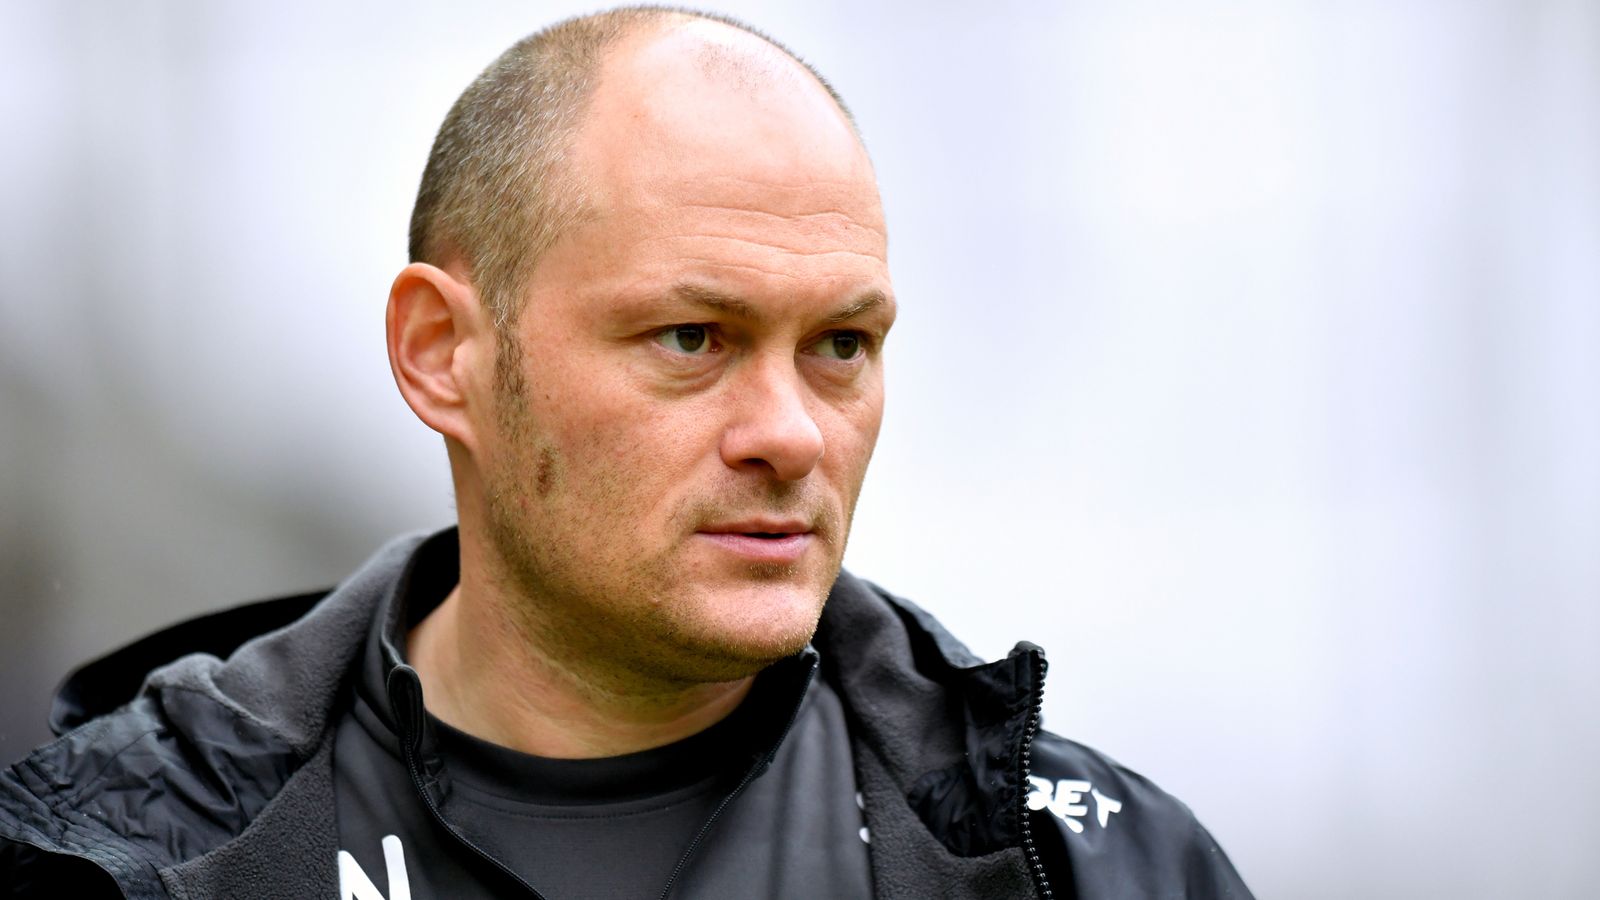 Sunderland: Alex Neil set to take charge of League One club after agreement reached